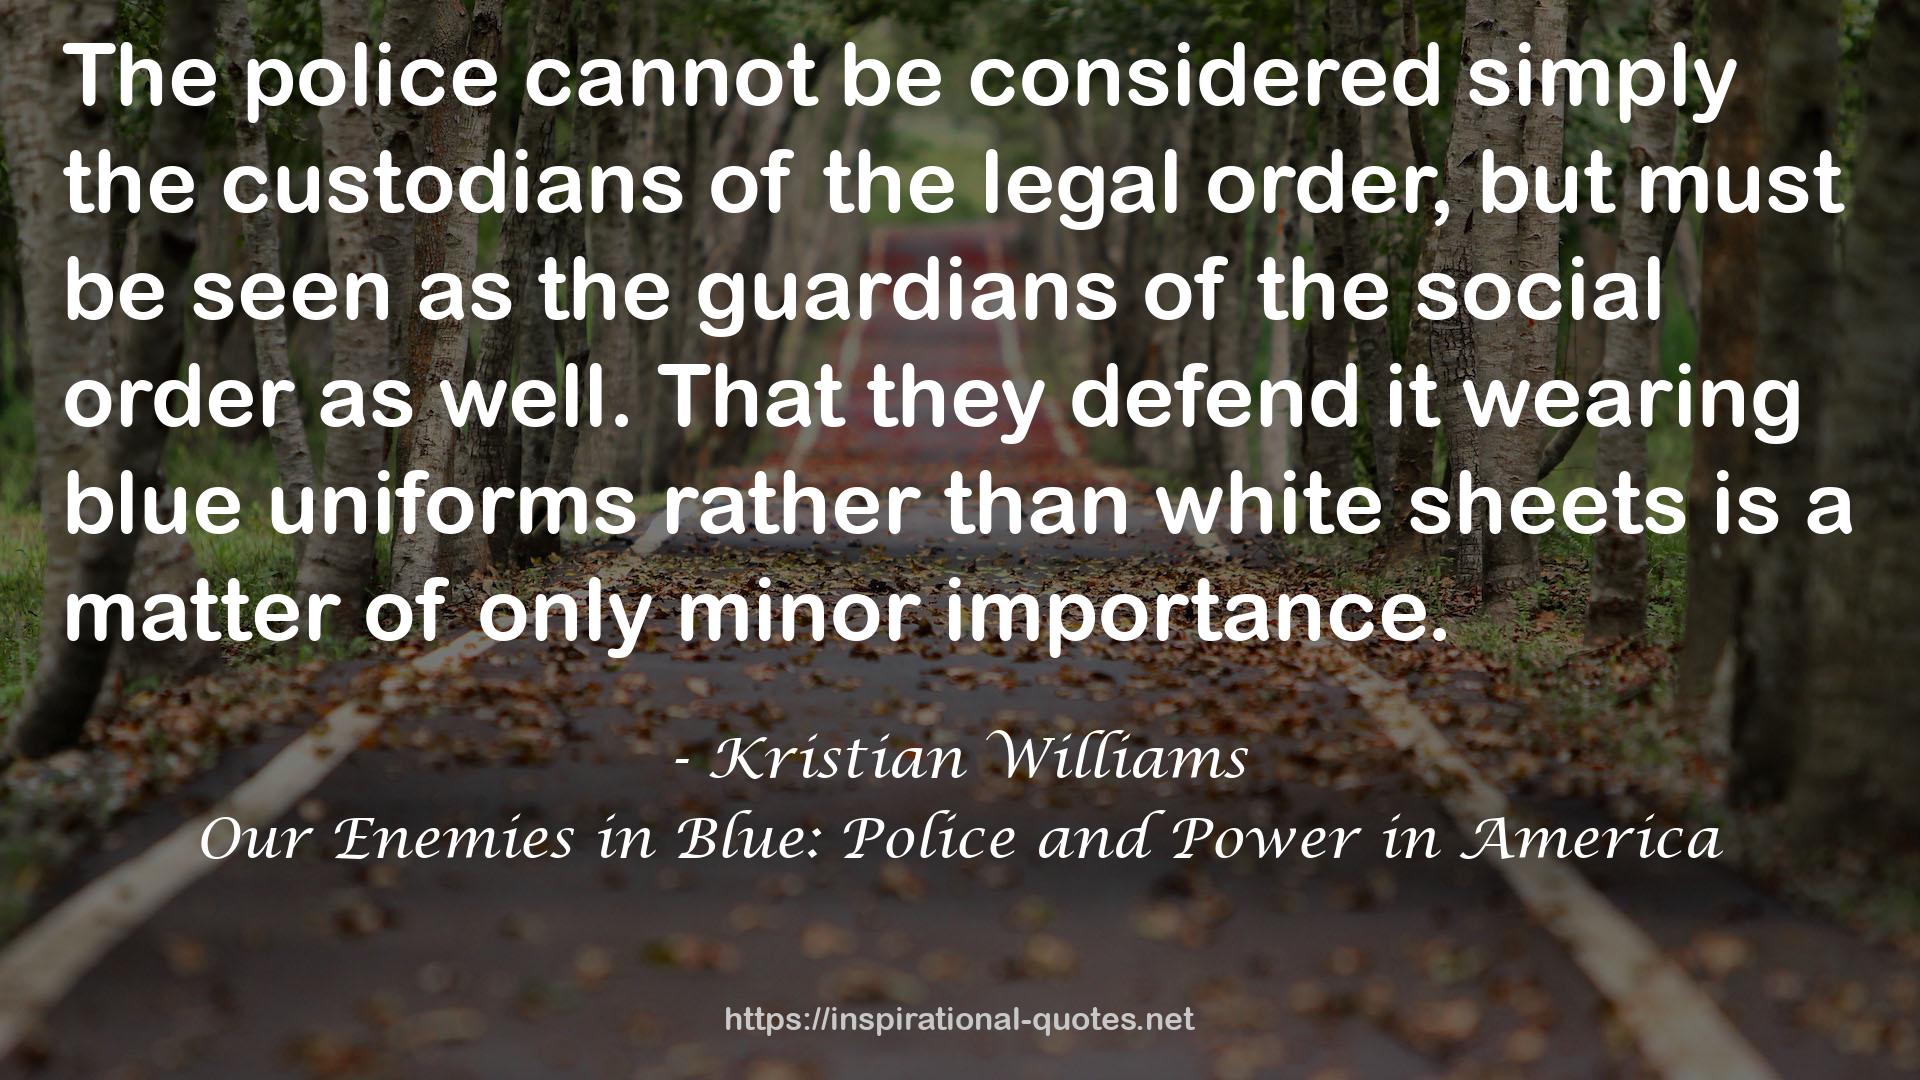 Our Enemies in Blue: Police and Power in America QUOTES